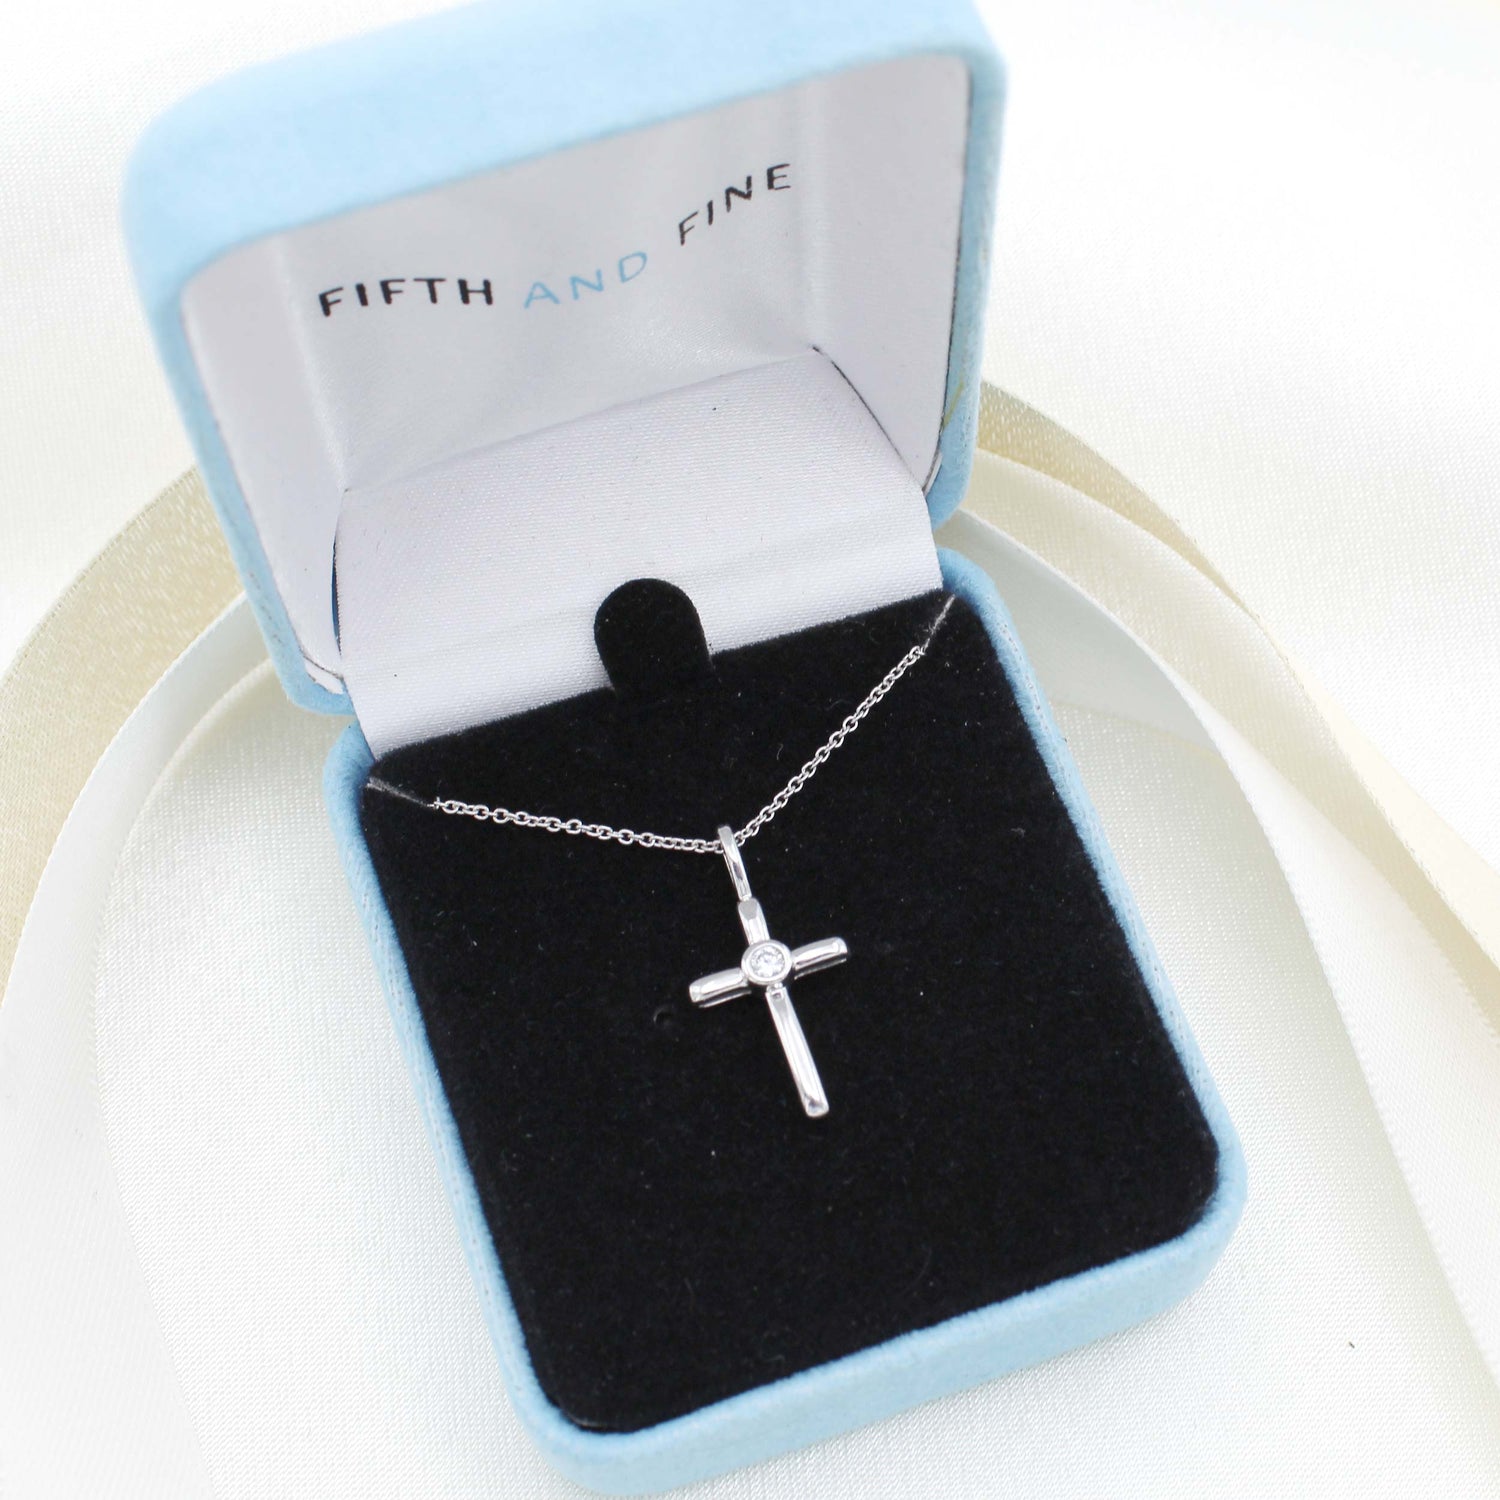 Simple Cross 1/20 Cttw Natural Diamond Pendant Necklace set in 925 Sterling Silver